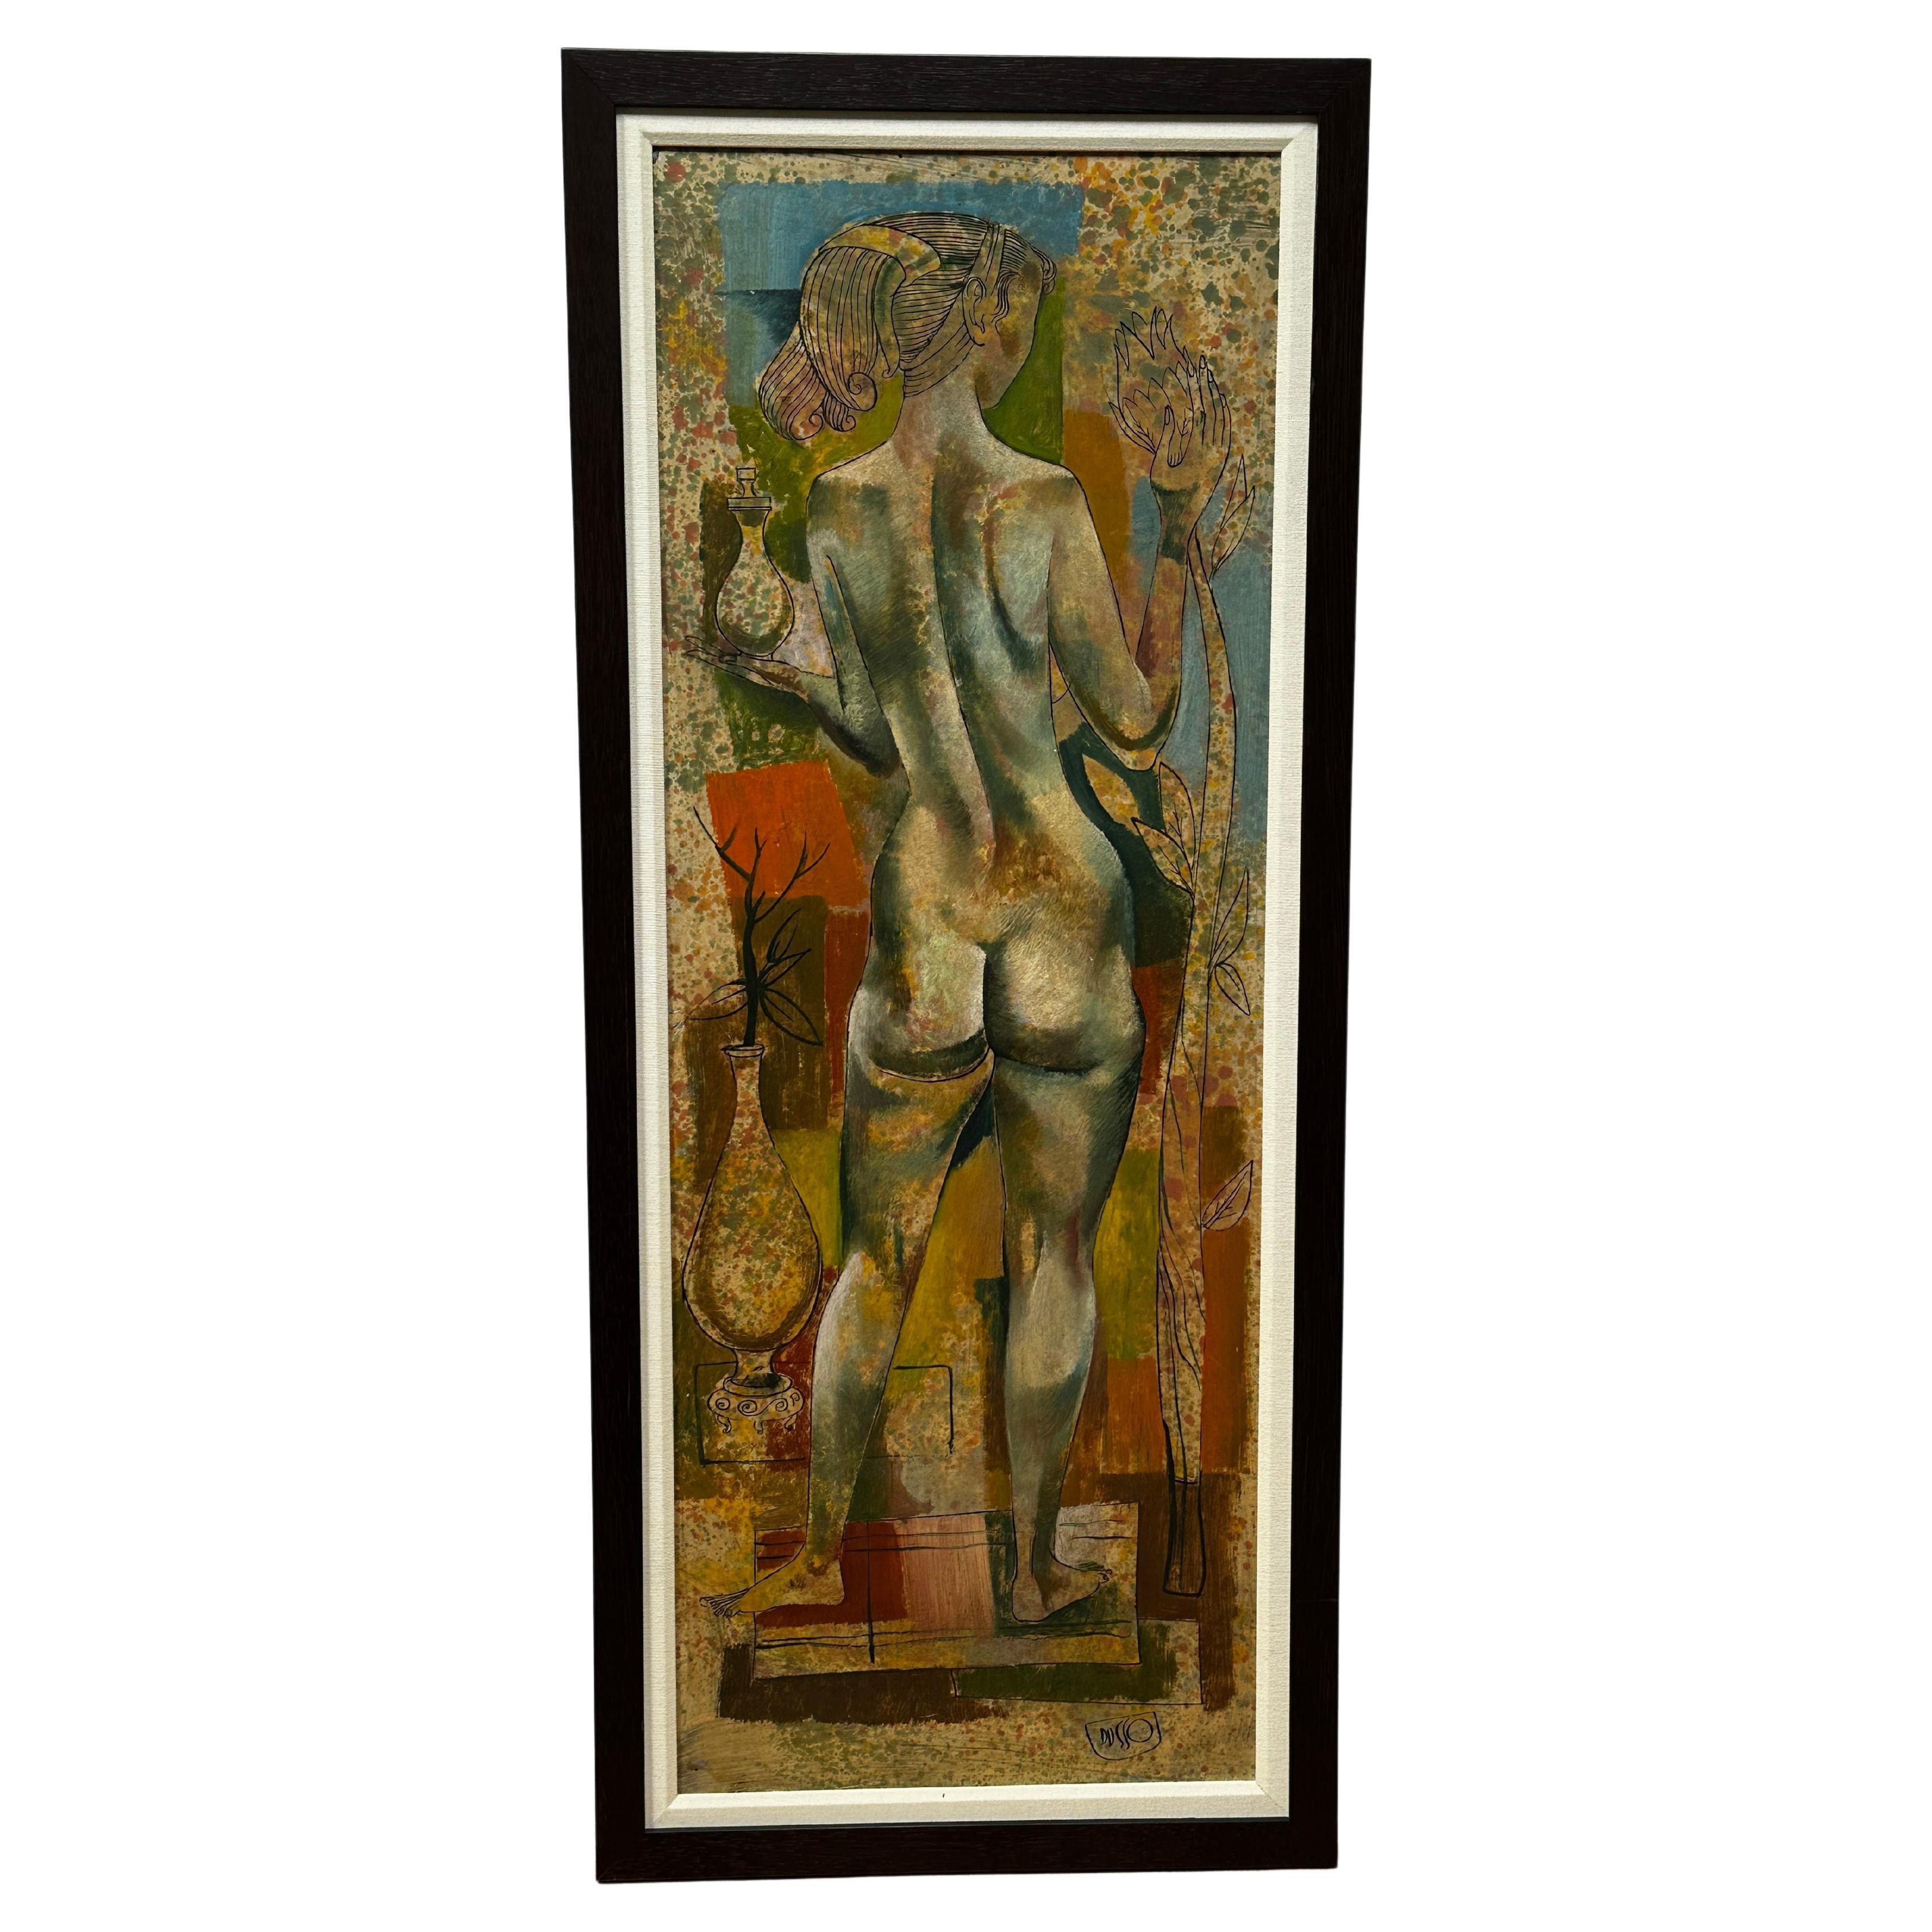 This delicate oil and ink painting on panel by Dusso depicts a beautiful and graceful woman seen from behind, her nude figure enhanced by the framing of her hair. She holds a vase in one hand while delicately touching a flower in the other,